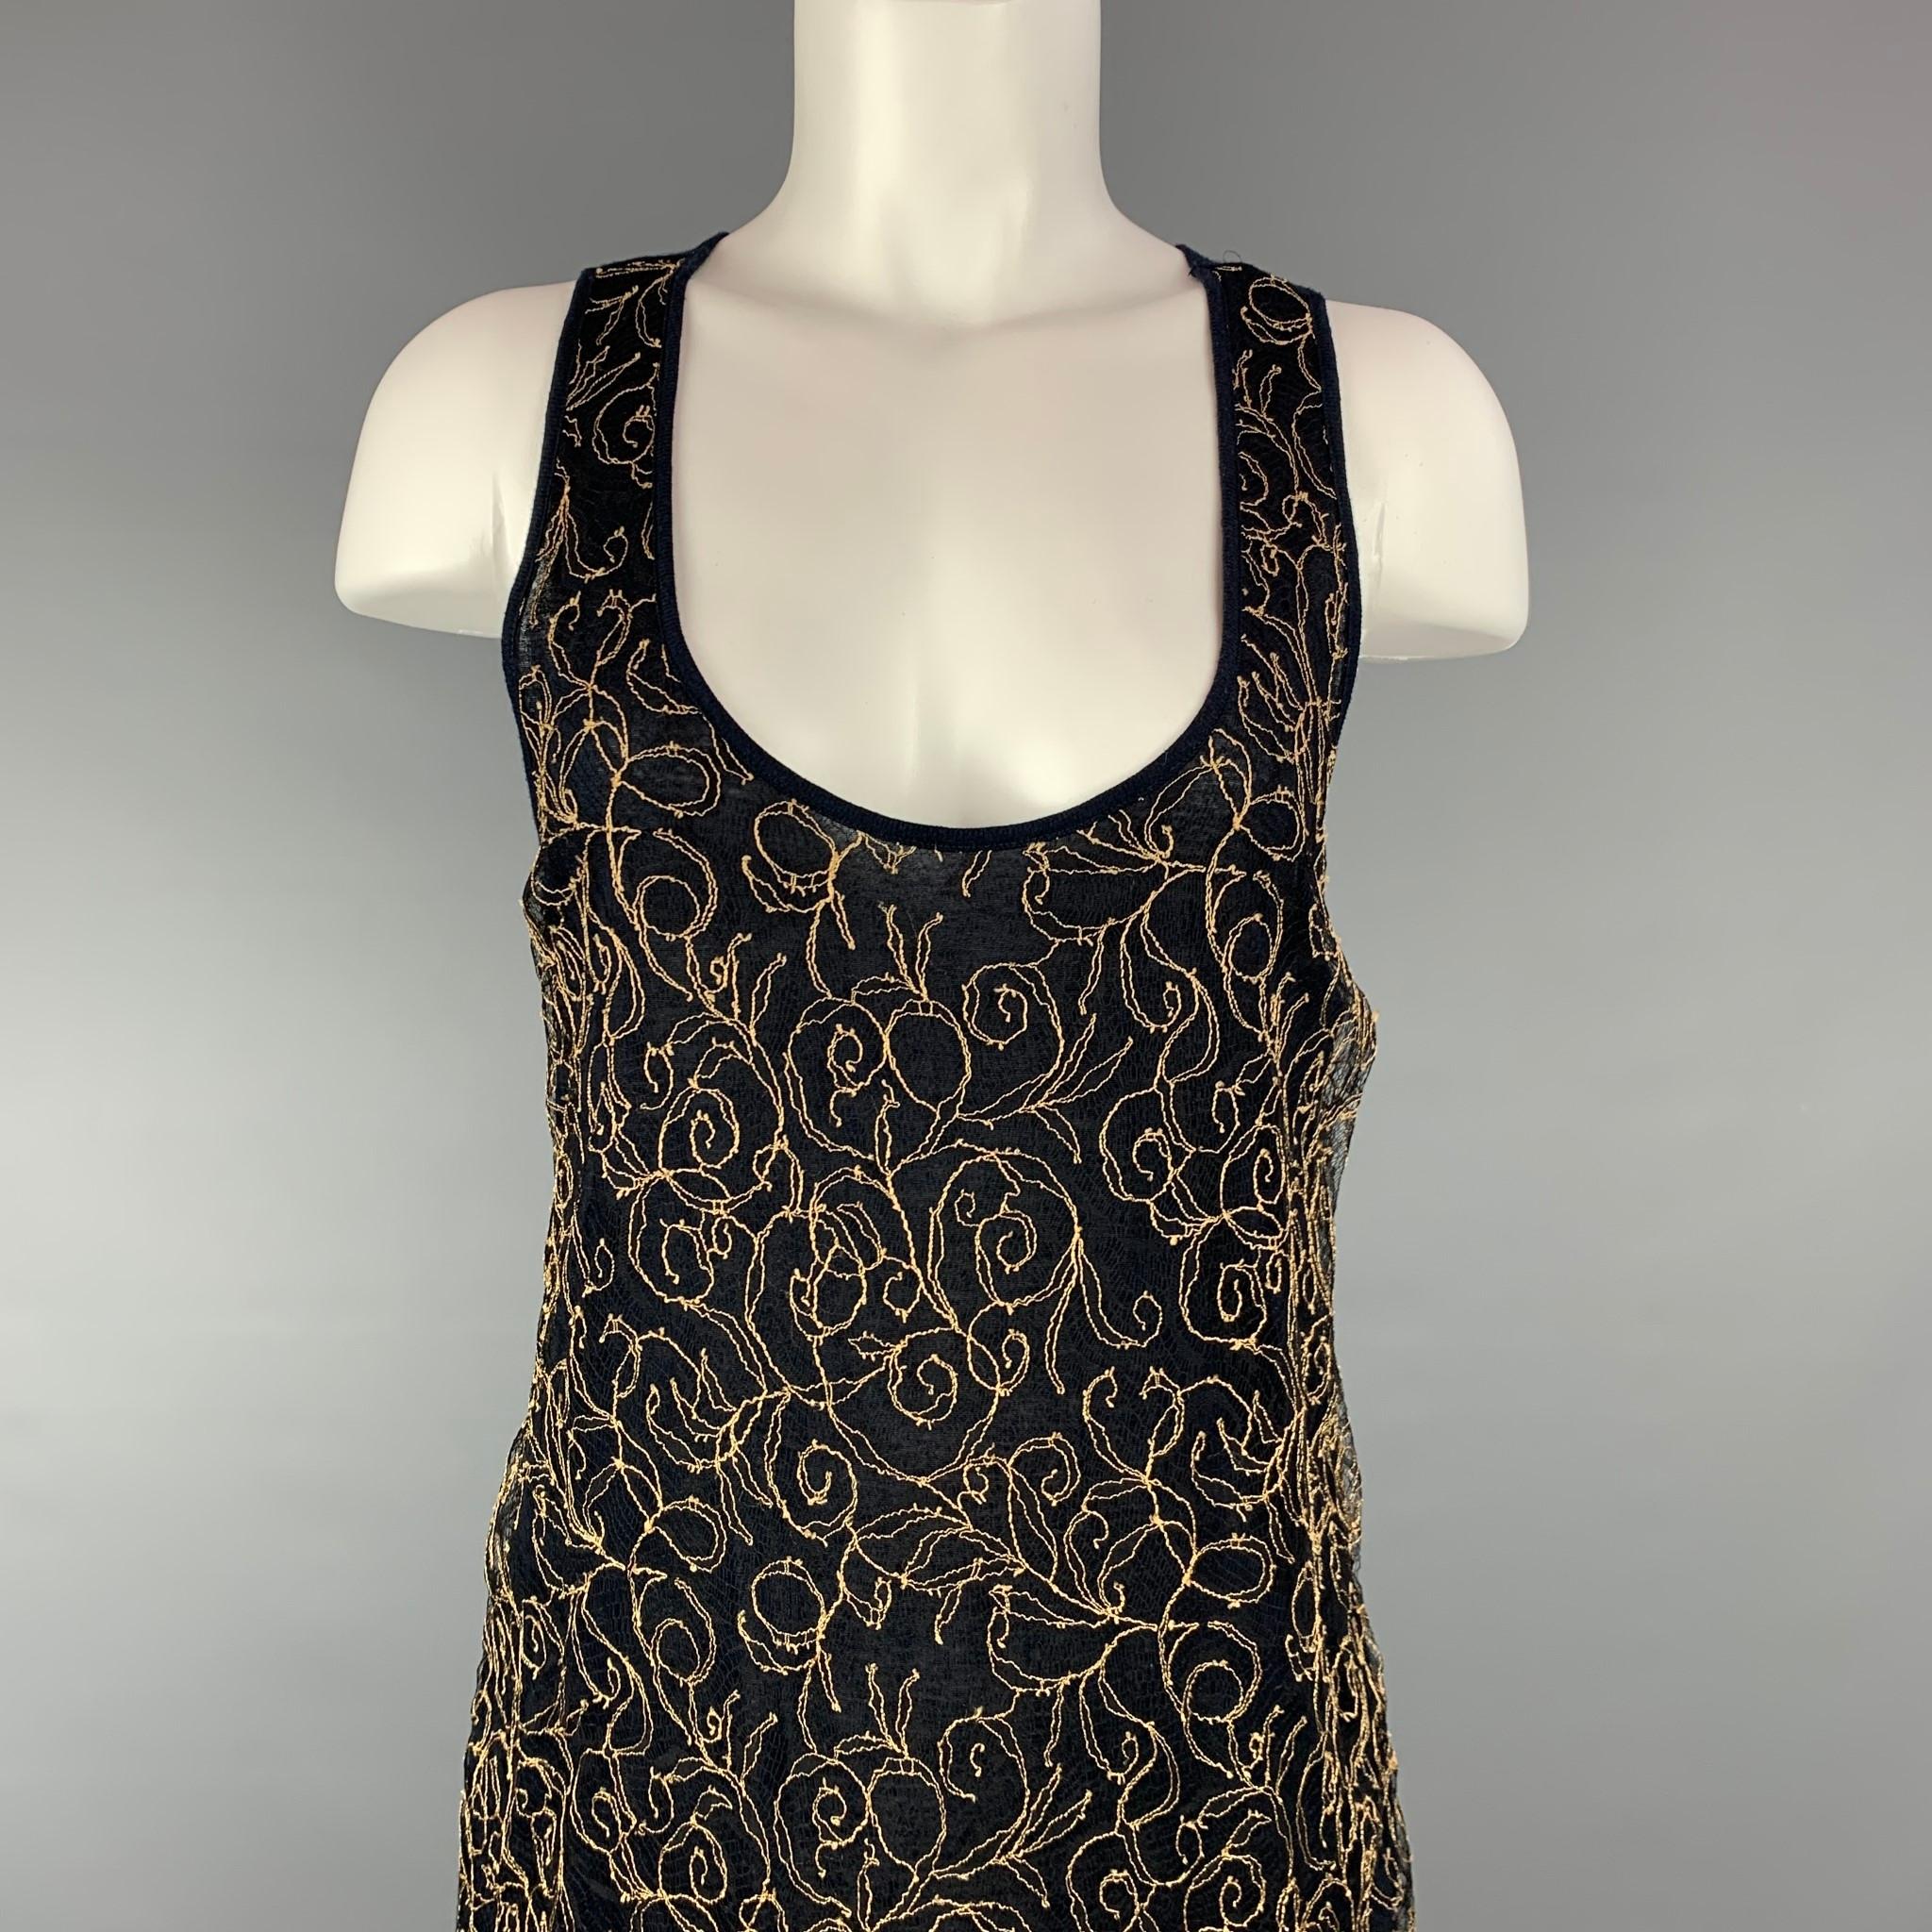 DRIES VAN NOTEN tank top comes in a navy & beige embroidered lace featuring a deep neckline. 

Very Good Pre-Owned Condition.
Marked: S

Measurements:

Bust: 32 in.
Length: 26.5 in. 